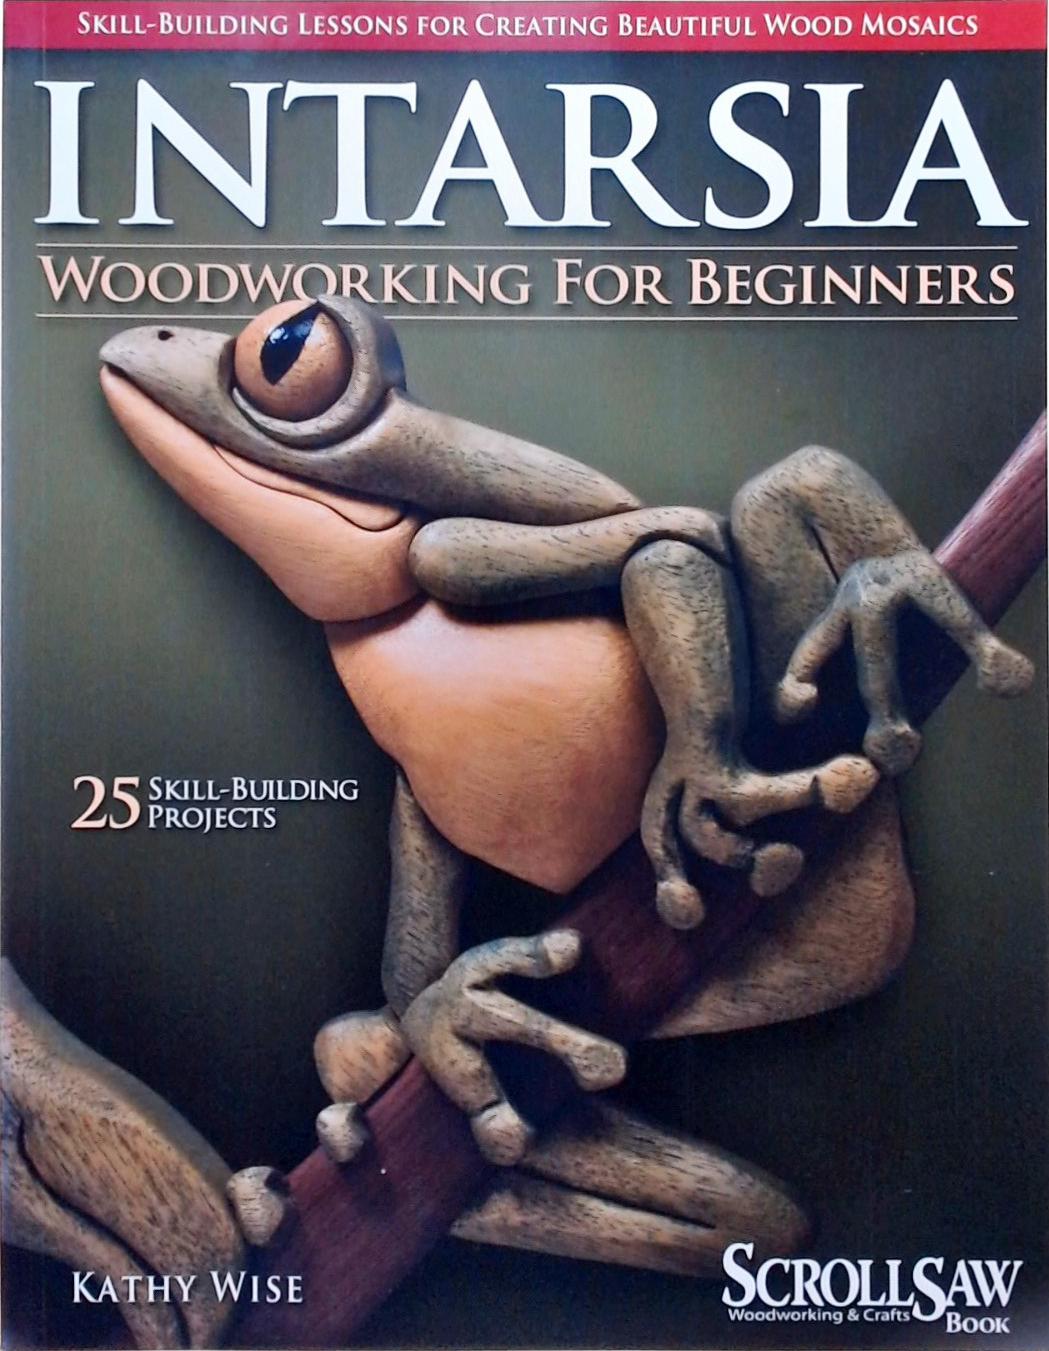 Intarsia Woodworking For Beginners